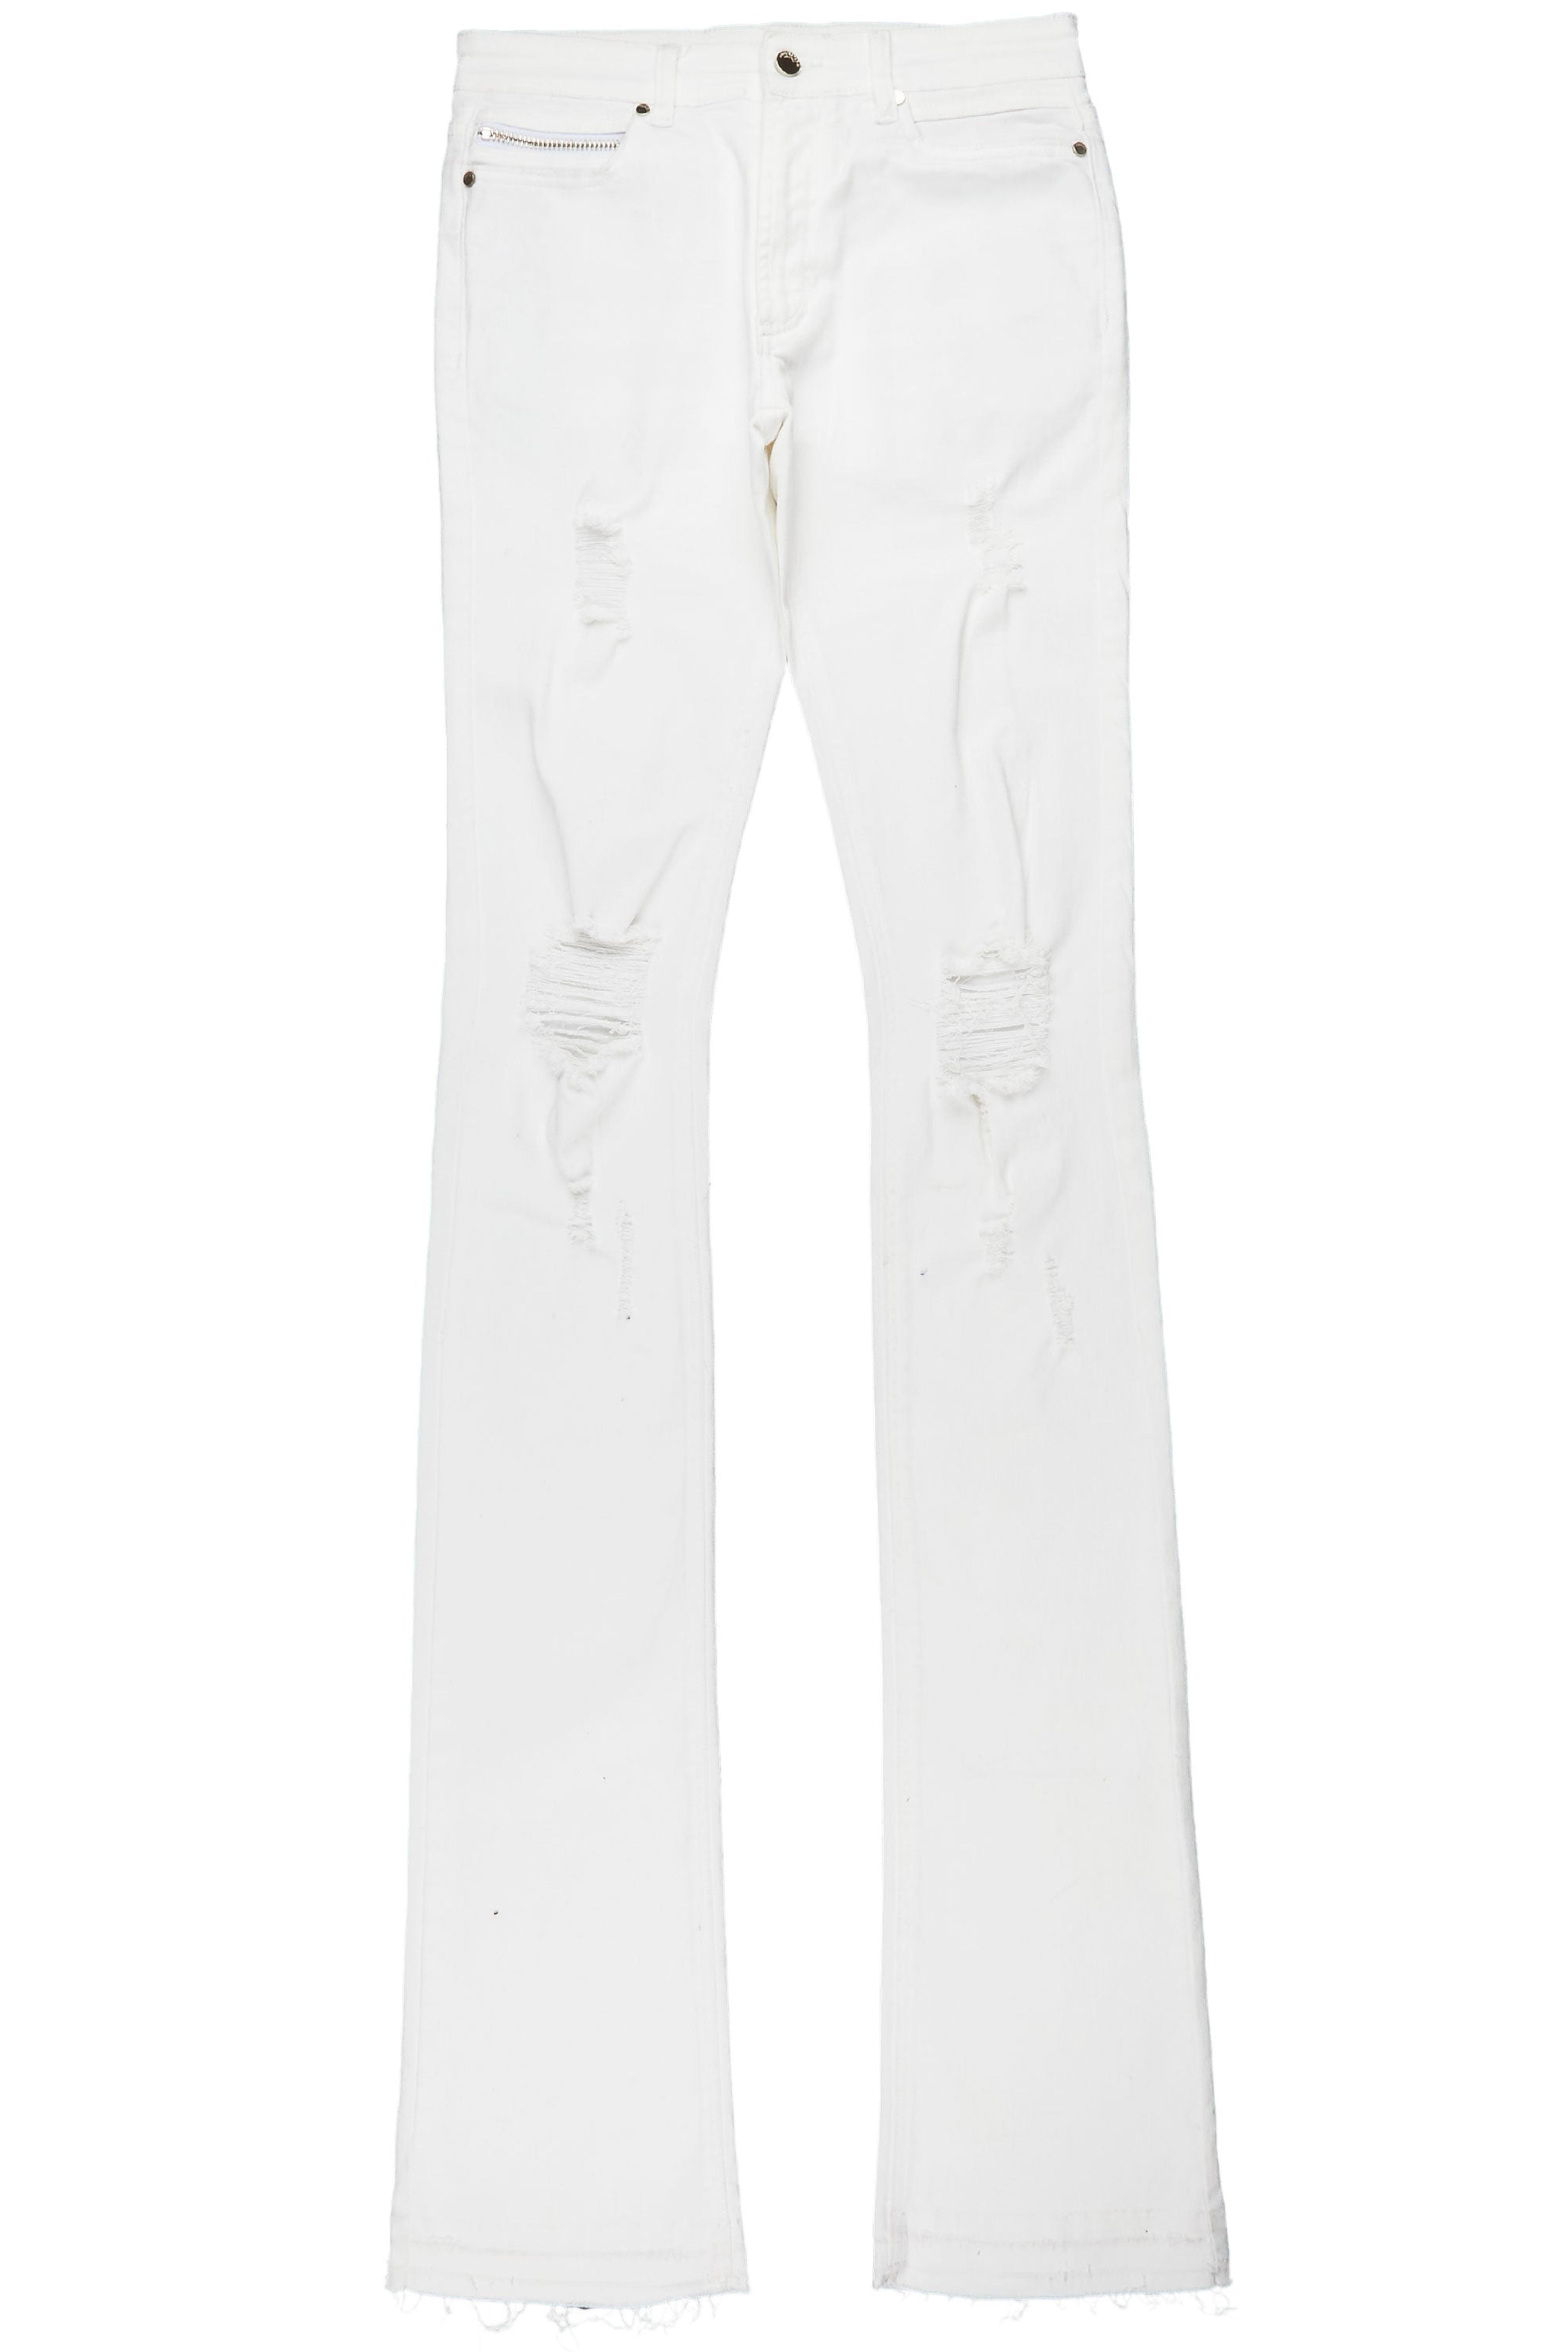 Alternate View 1 of Sniper White Super Stacked Flare Jean